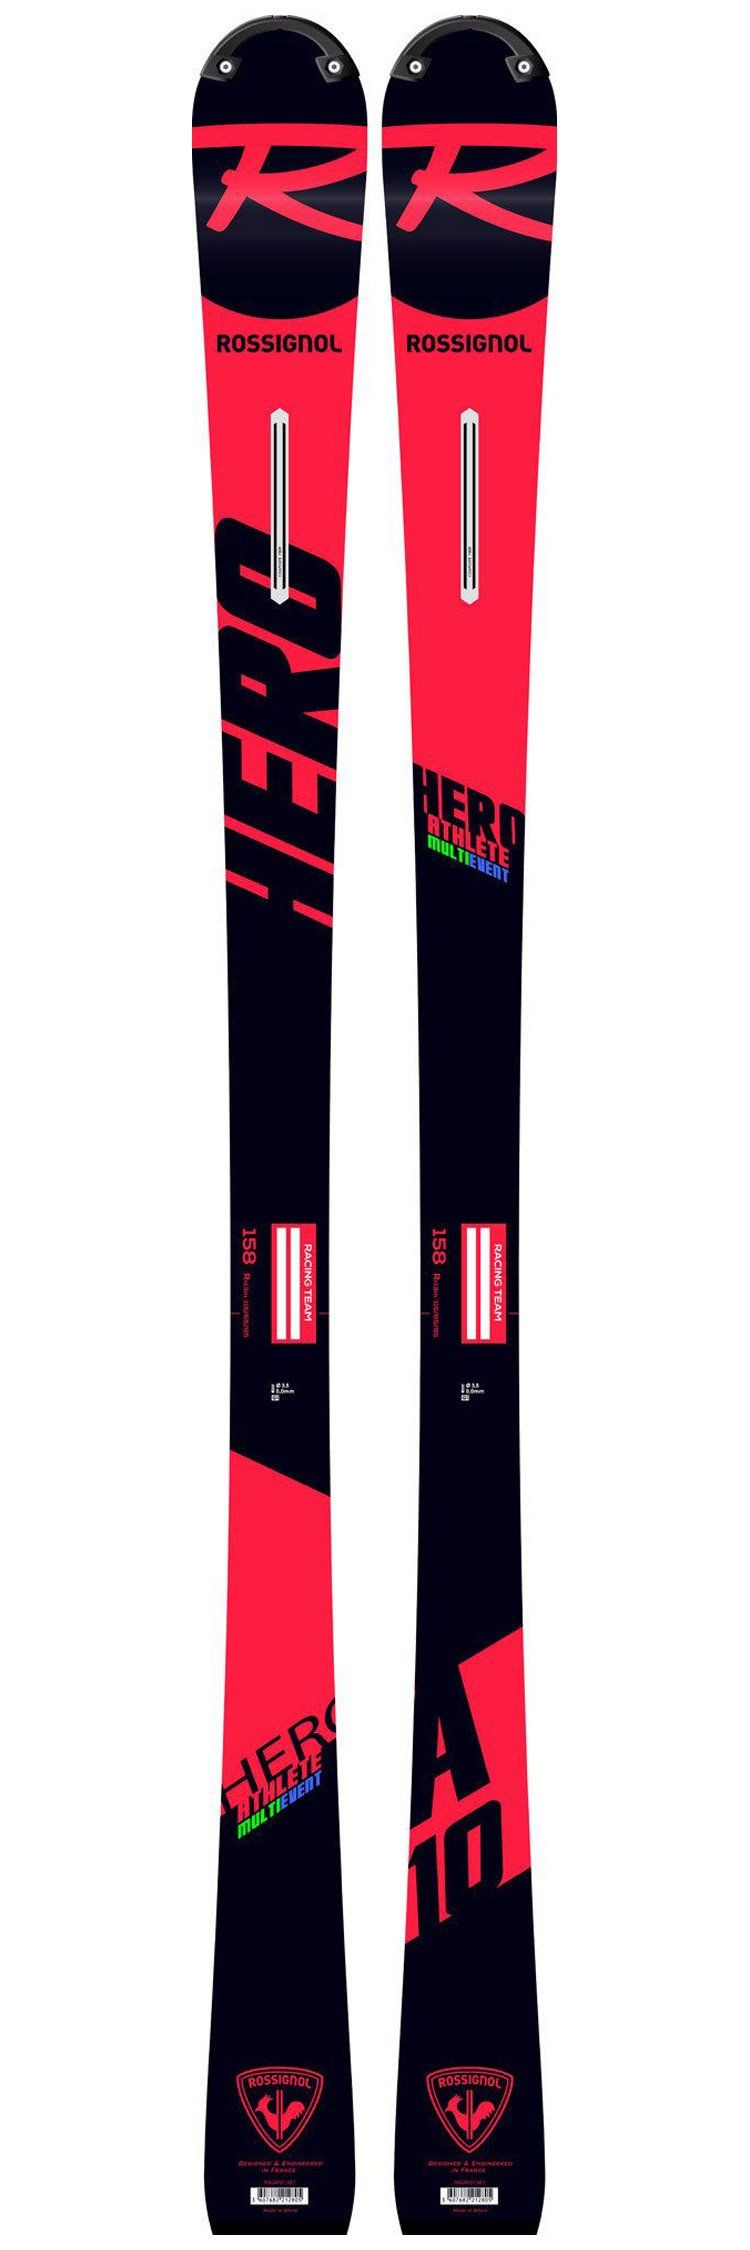 Pack Skis Hero Athlete Multi Event Open 2021 + Fixations Jr7